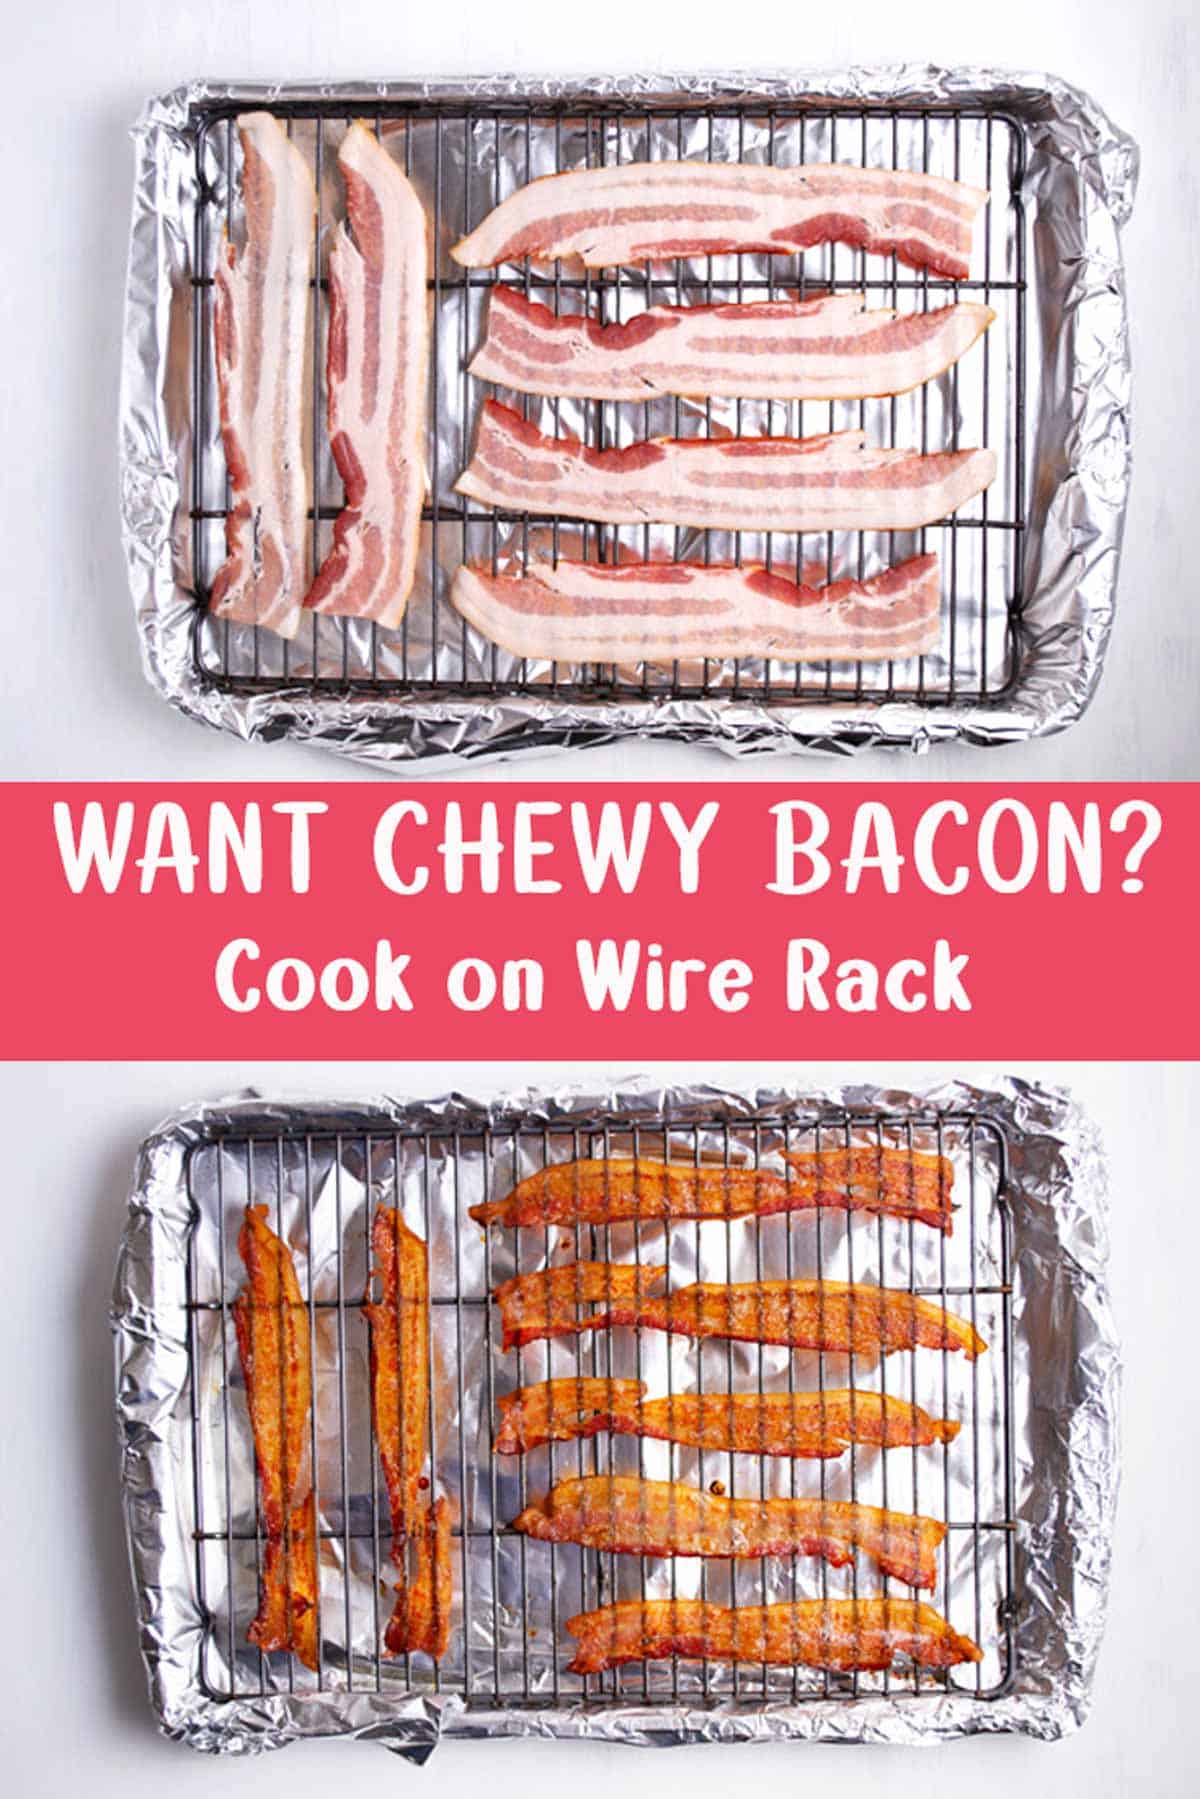 Raw bacon on a wire rack next to cooked bacon that has been cooked on a wire rack.